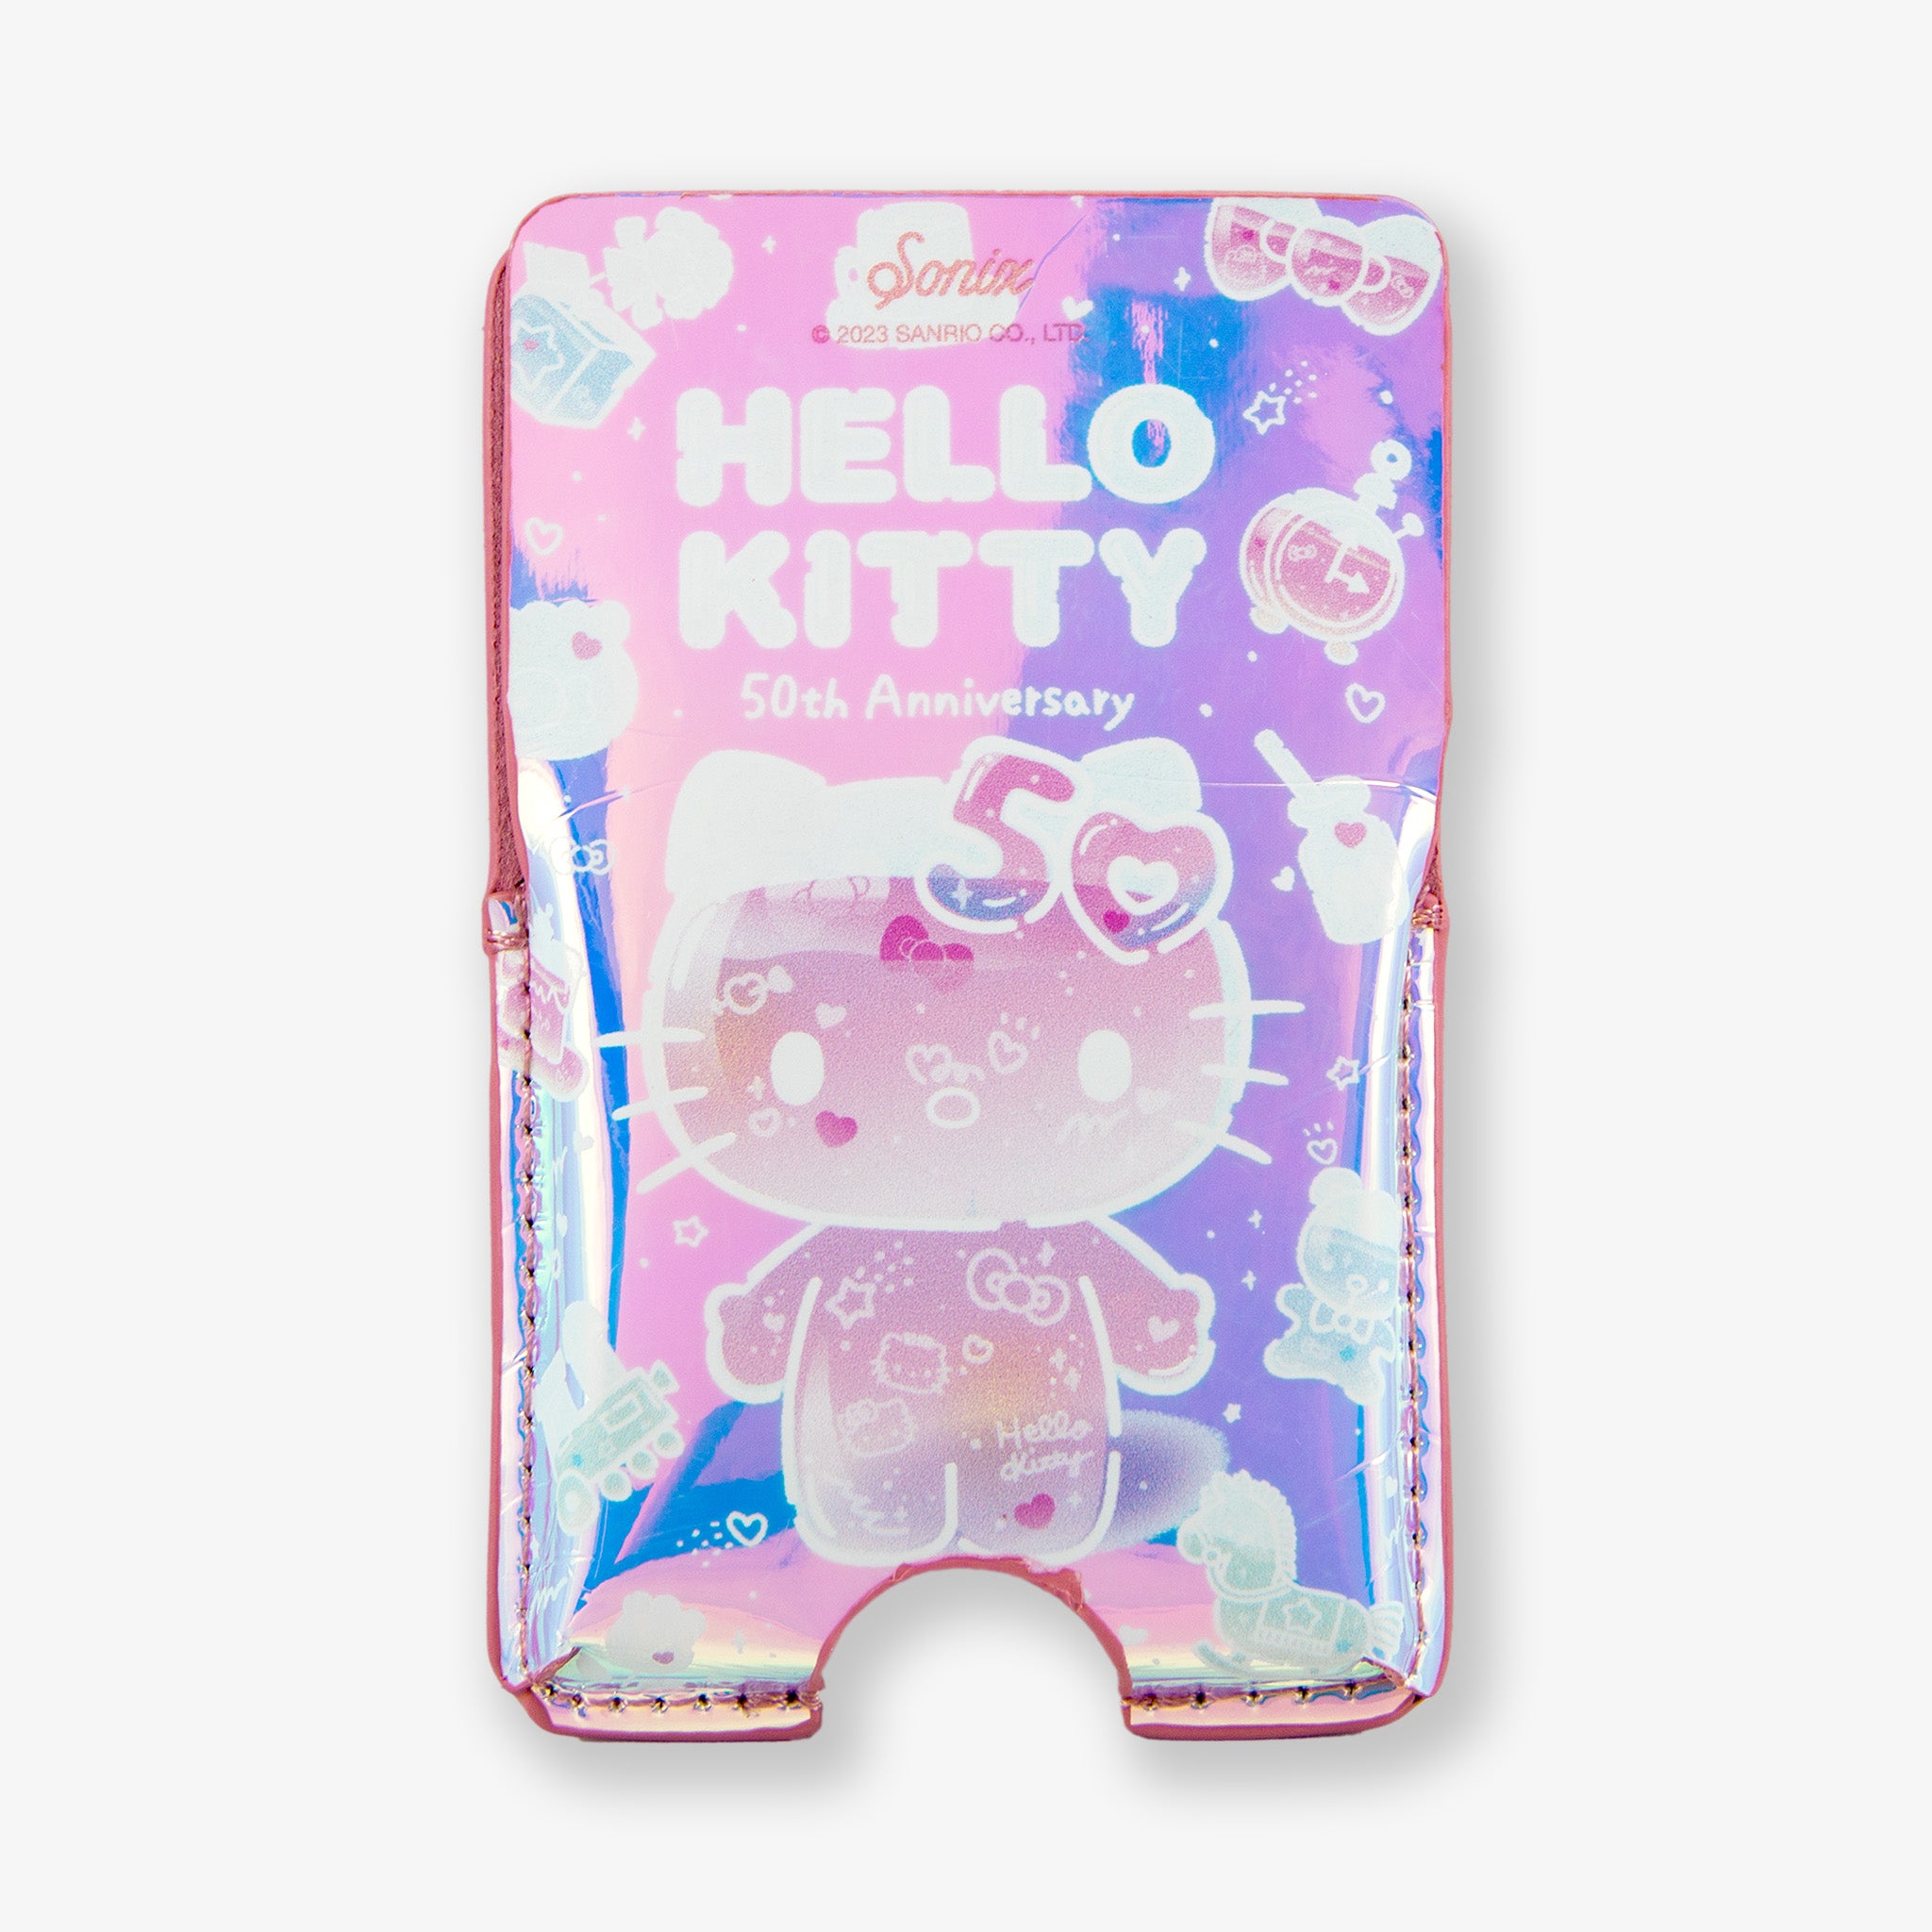 Magnetic Wallet - Hello Kitty® 50th Anniversary